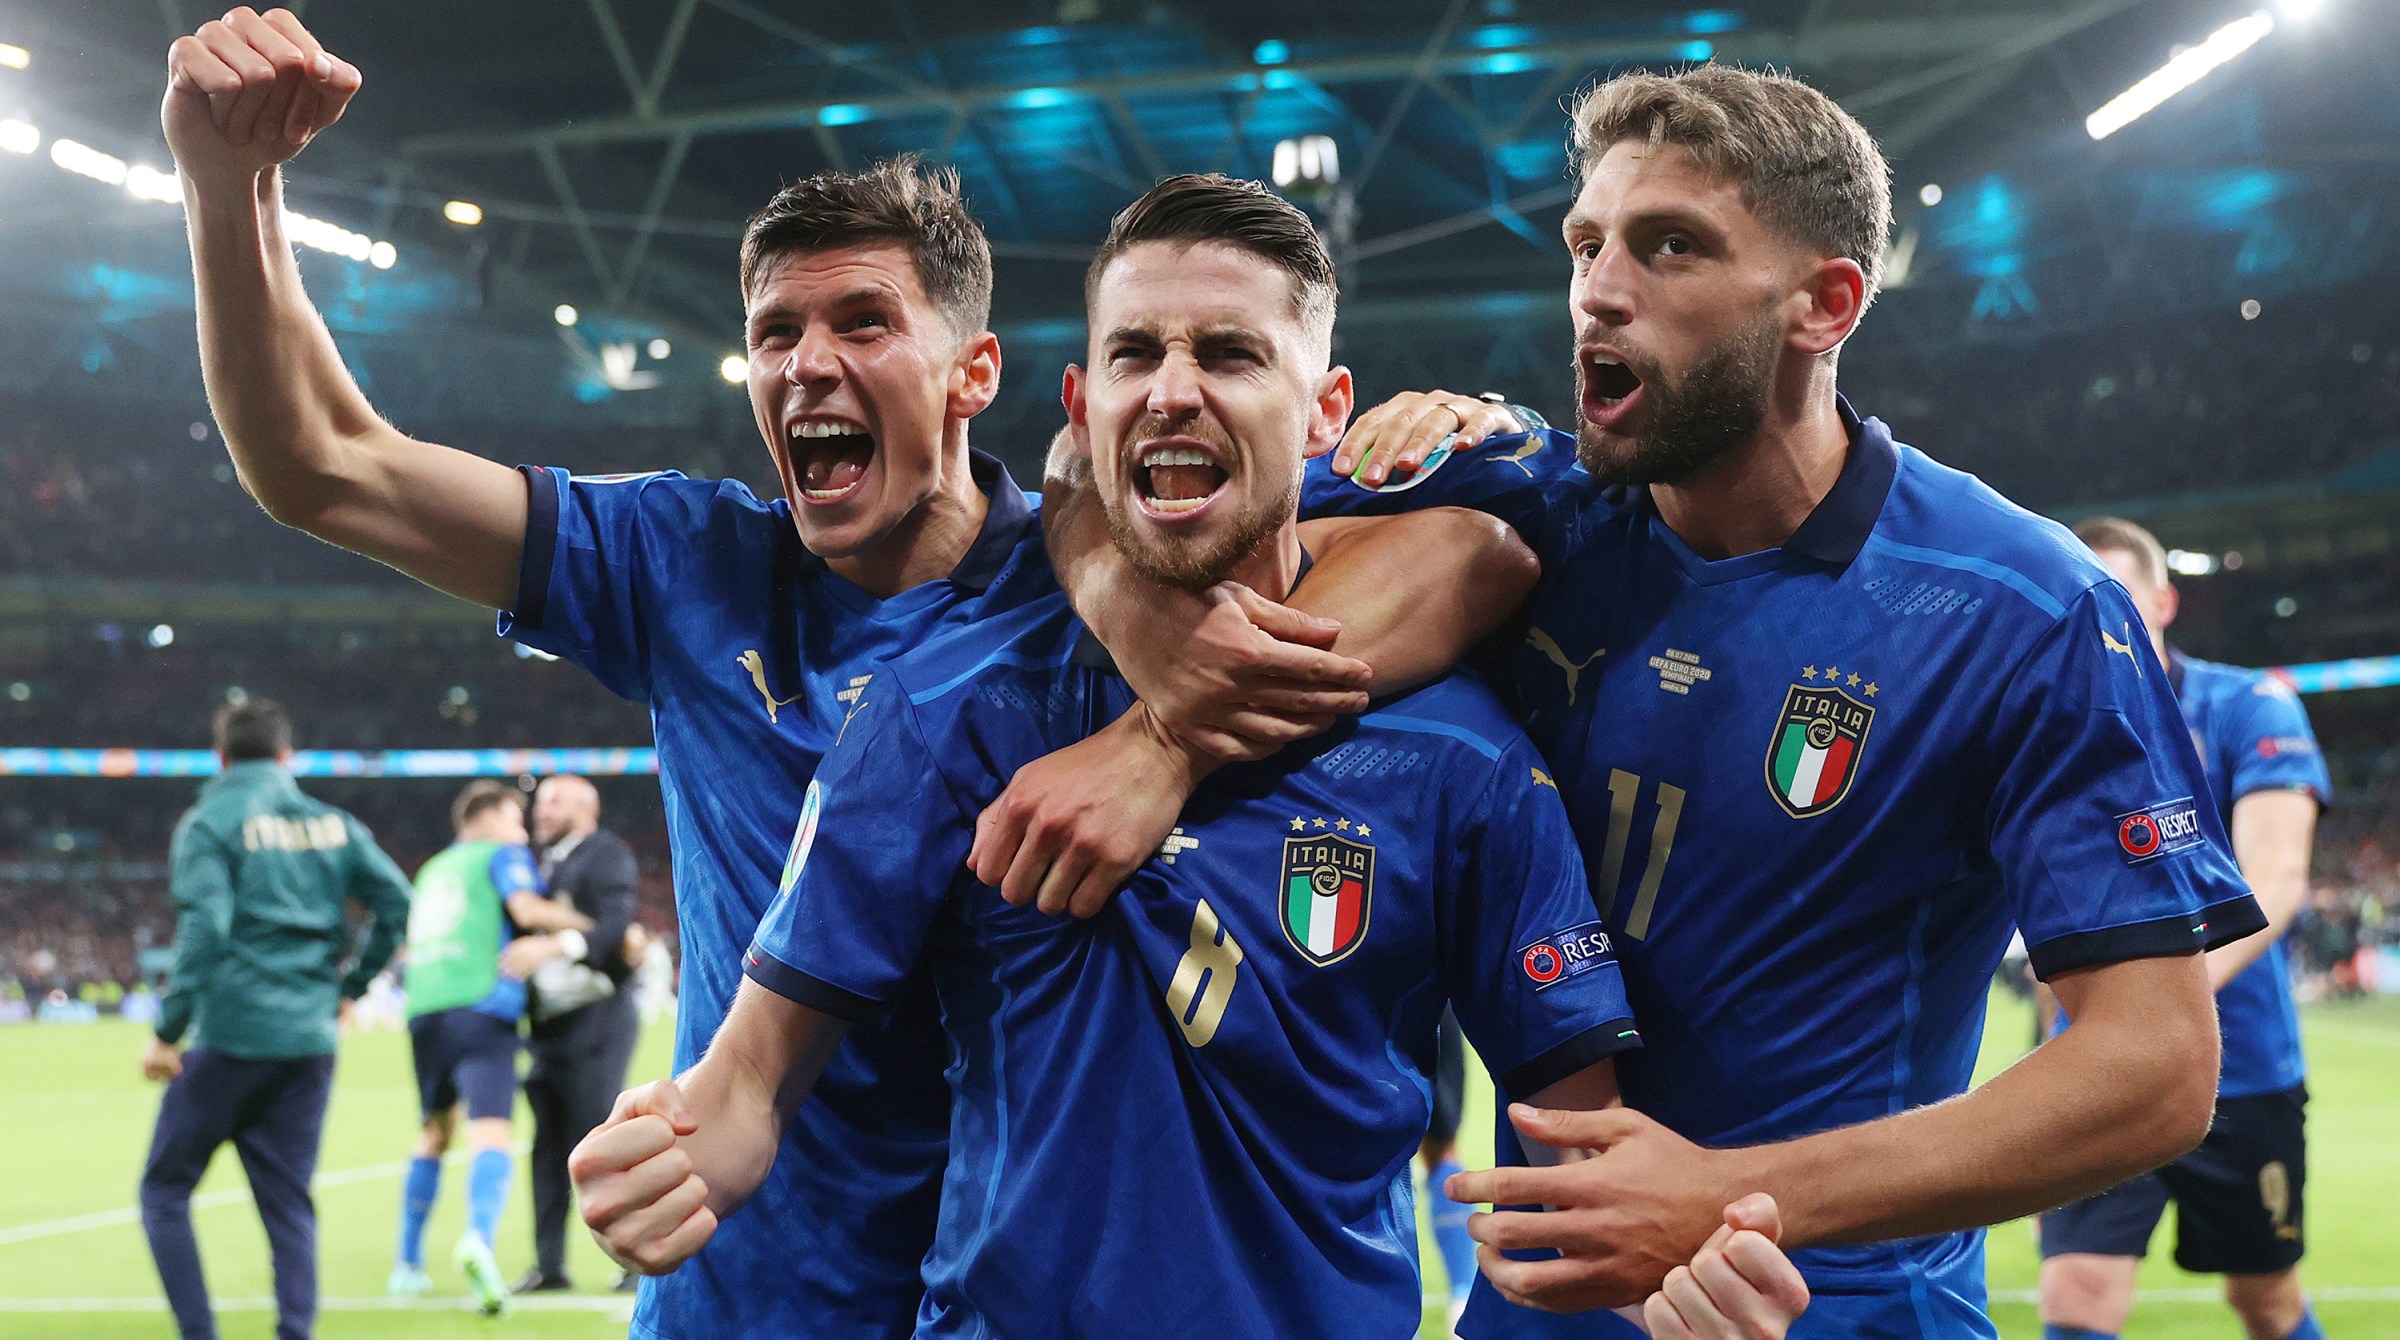 Jorginho of Italy celebrates with Matteo Pessina and Domenico Berardi after scoring their sides winning penalty in the penalty shoot out during the UEFA Euro 2020 Championship Semi-final match between Italy and Spain at Wembley Stadium on July 06, 2021 in London, England.